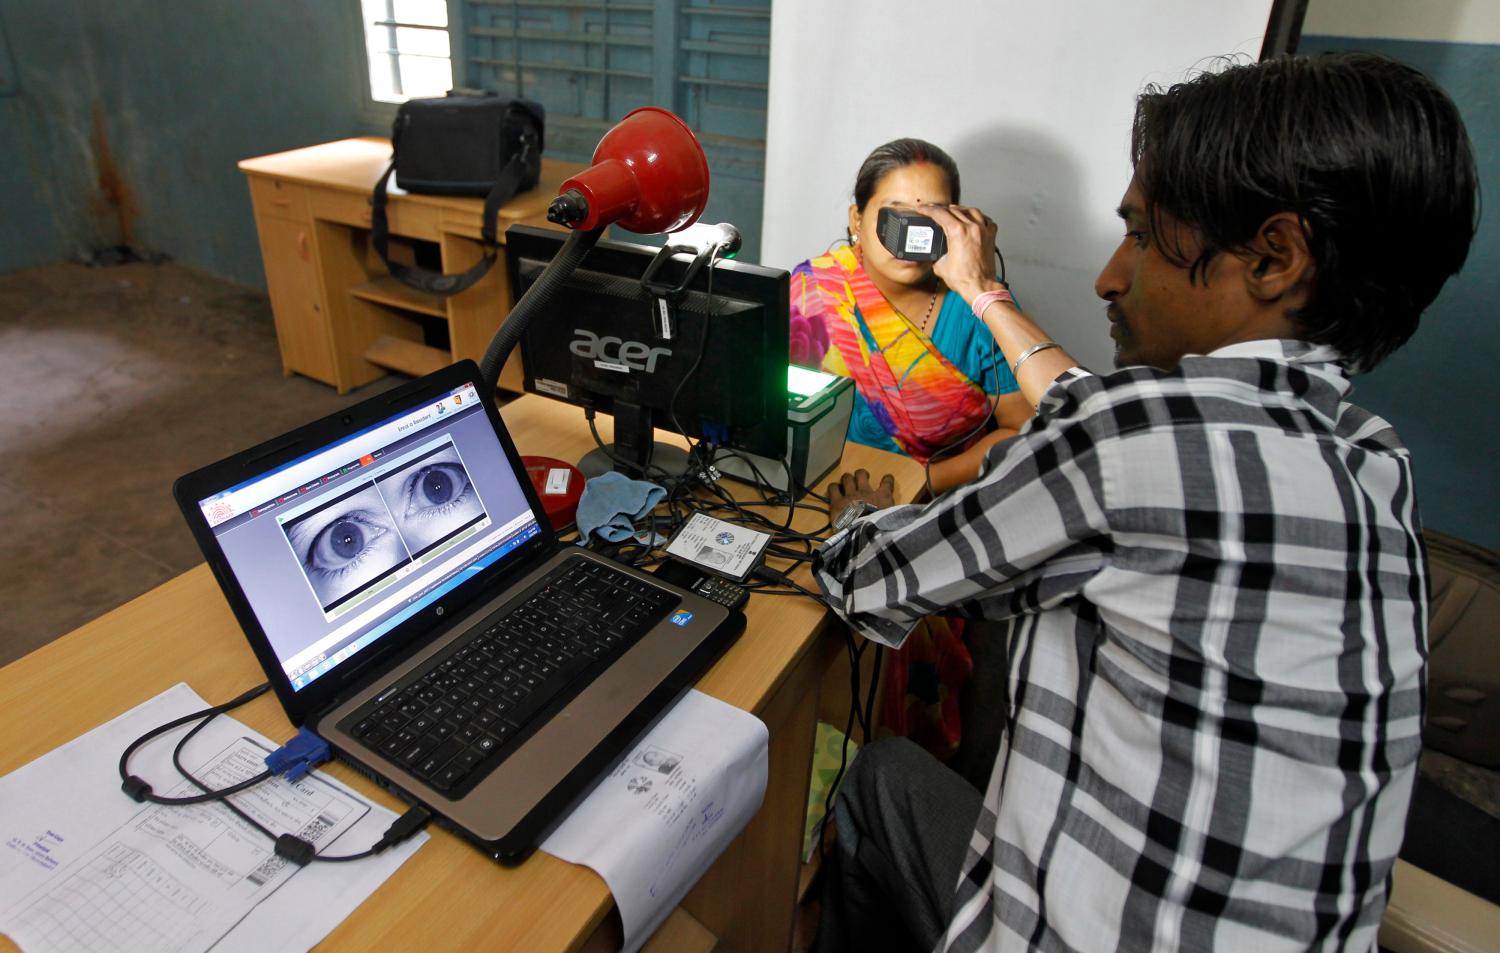 A woman goes through the process of eye scanning for Unique Identification (UID) database system in the outskirts of the western Indian city of Ahmedabad February 13, 2013. The UID database, known as Aadhaar, will help directly transfer budget-busting subsidies to the poor, plugging in leakages in welfare spending. Picture taken February 13, 2013.    To match INDIA-BUDGET/     REUTERS/Amit Dave (INDIA - Tags: BUSINESS SOCIETY)